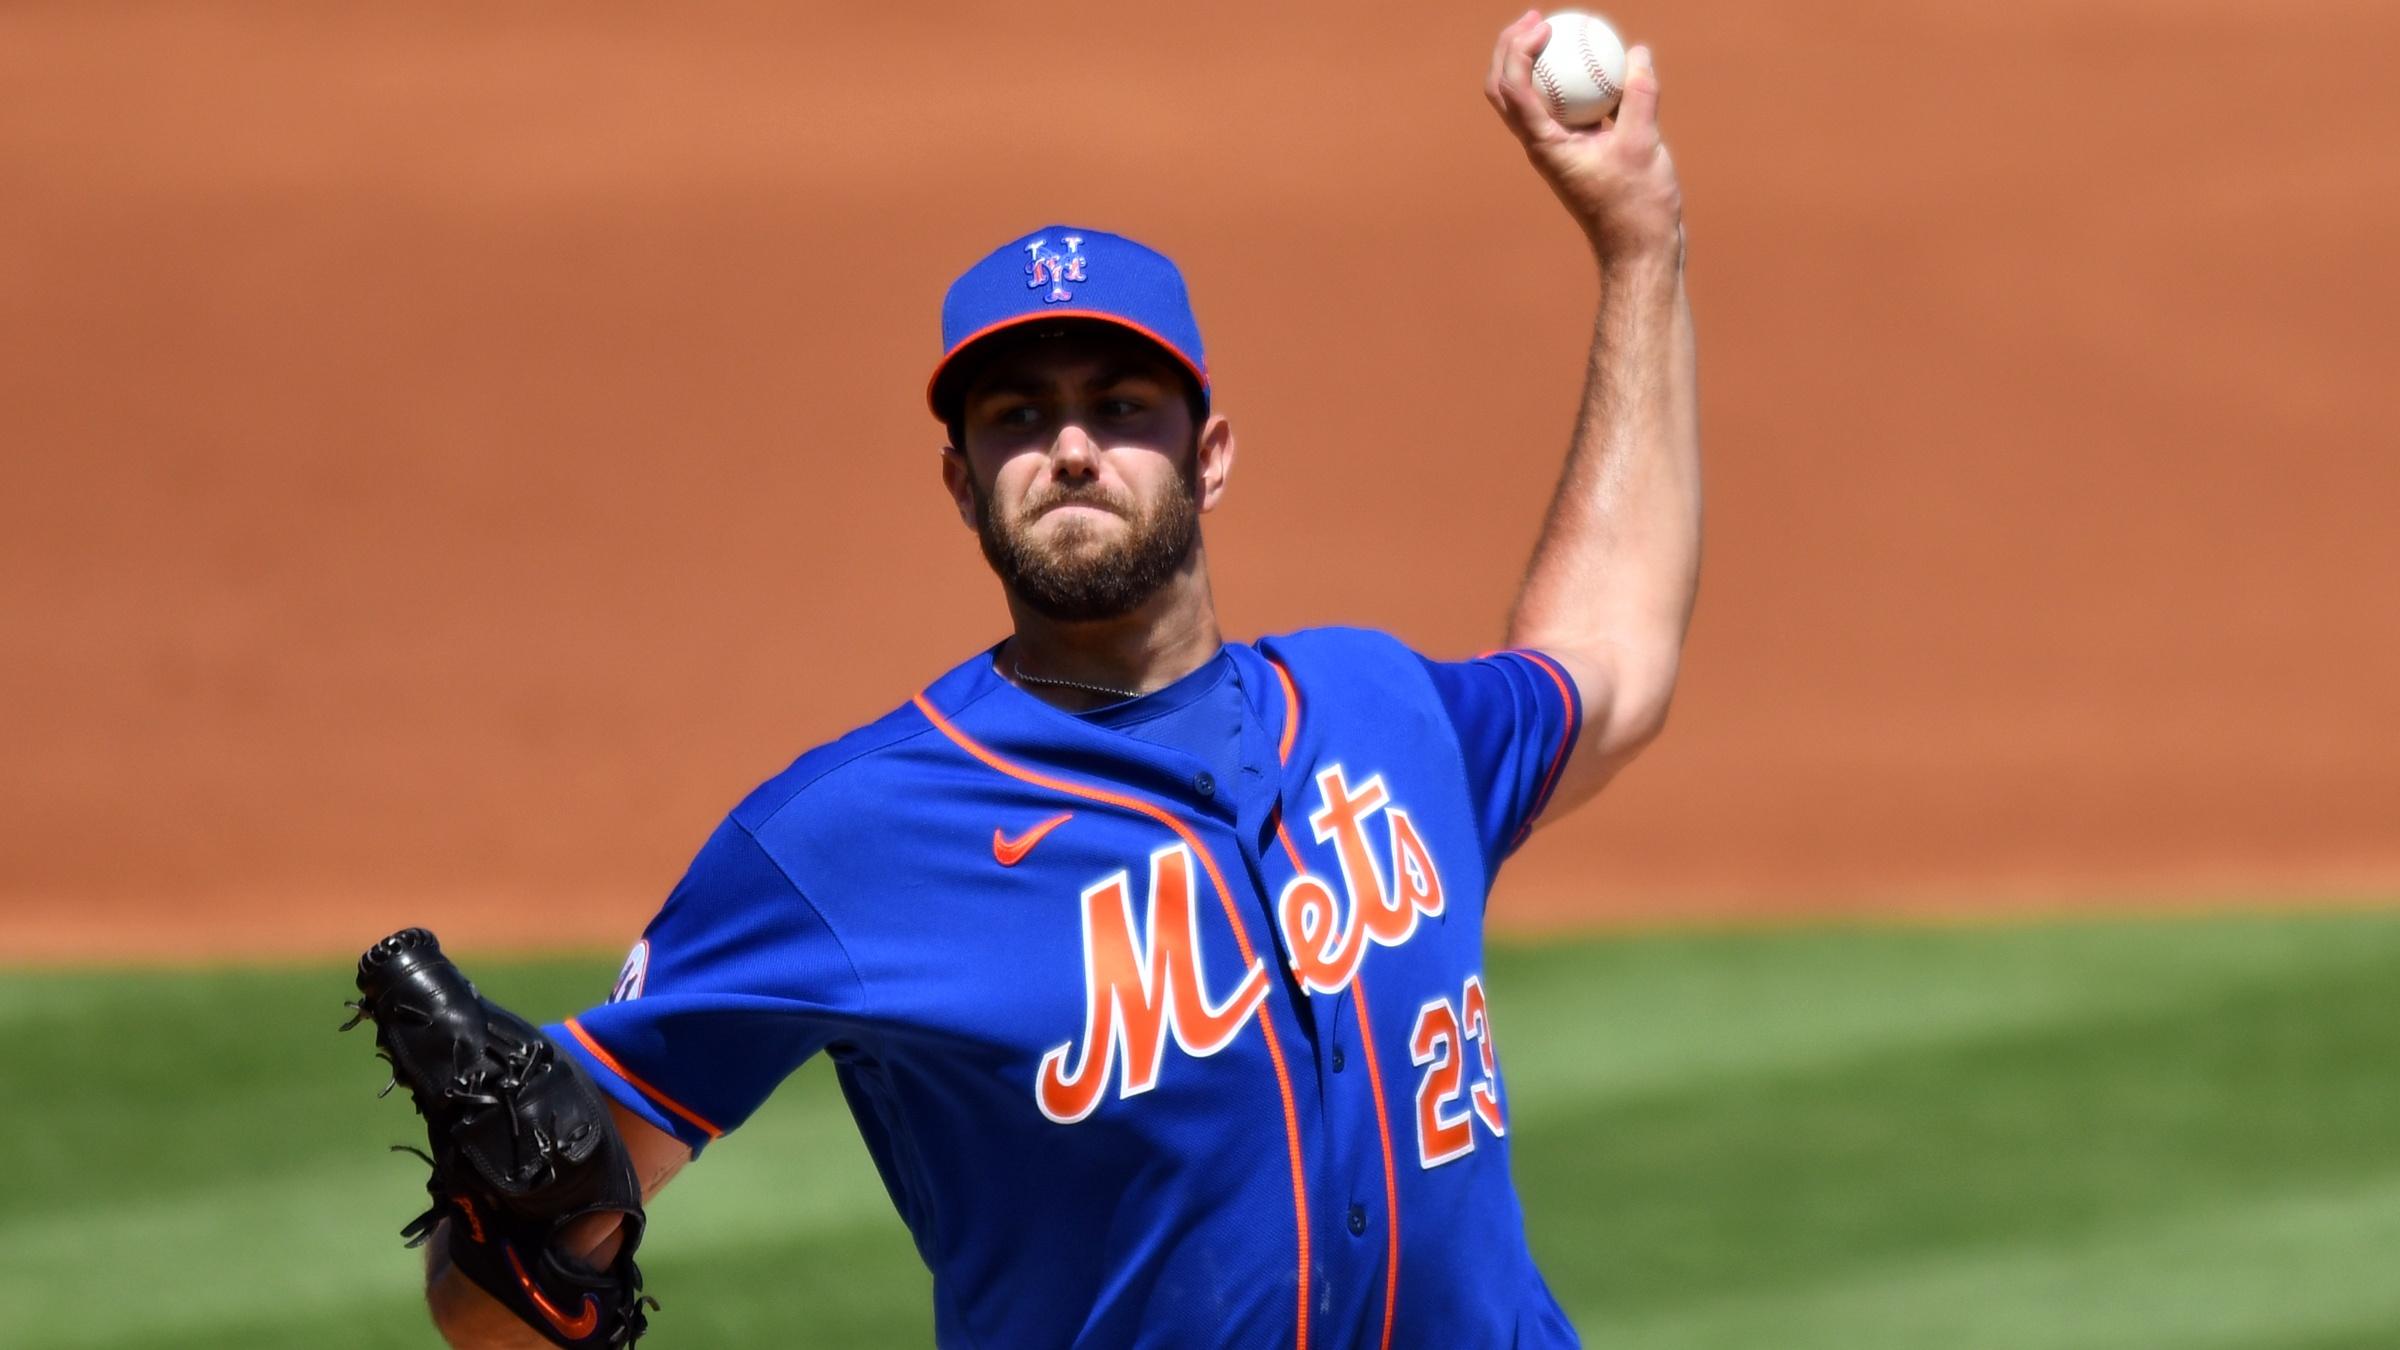 Mar 14, 2021; Port St. Lucie, Florida, USA; New York Mets pitcher David Peterson (23) pitches against the St. Louis Cardinals during a spring training game at Clover Park. / © Jim Rassol-USA TODAY Sports